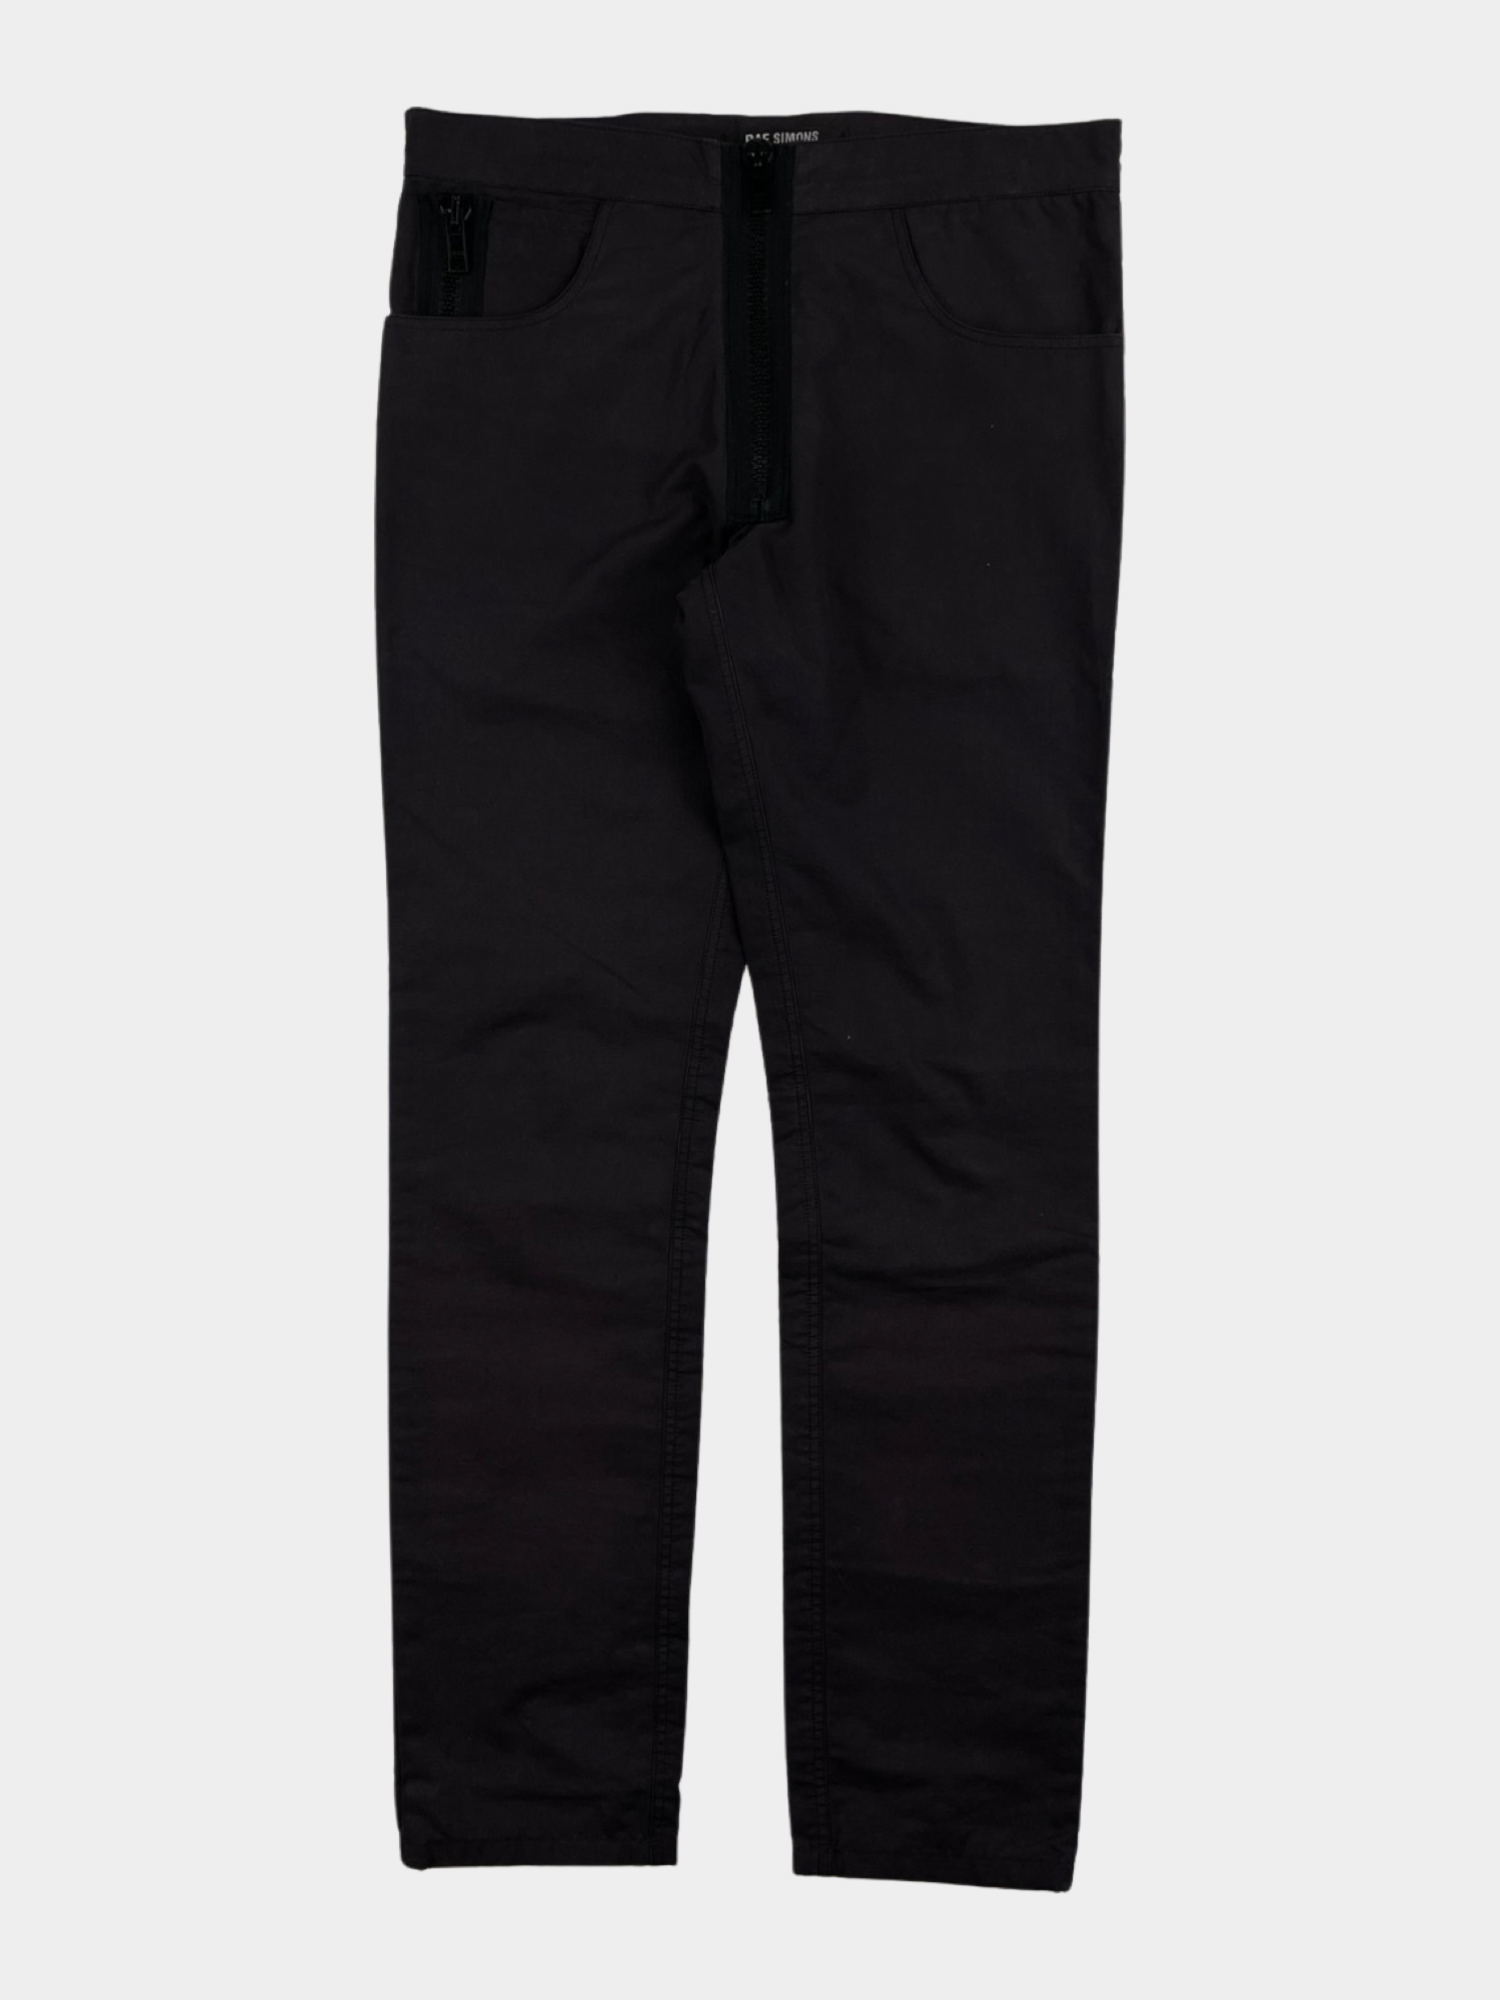 RAF SIMONS Inversed Zip Oiled PantsAW2004 “Waves” - ARCHIVED